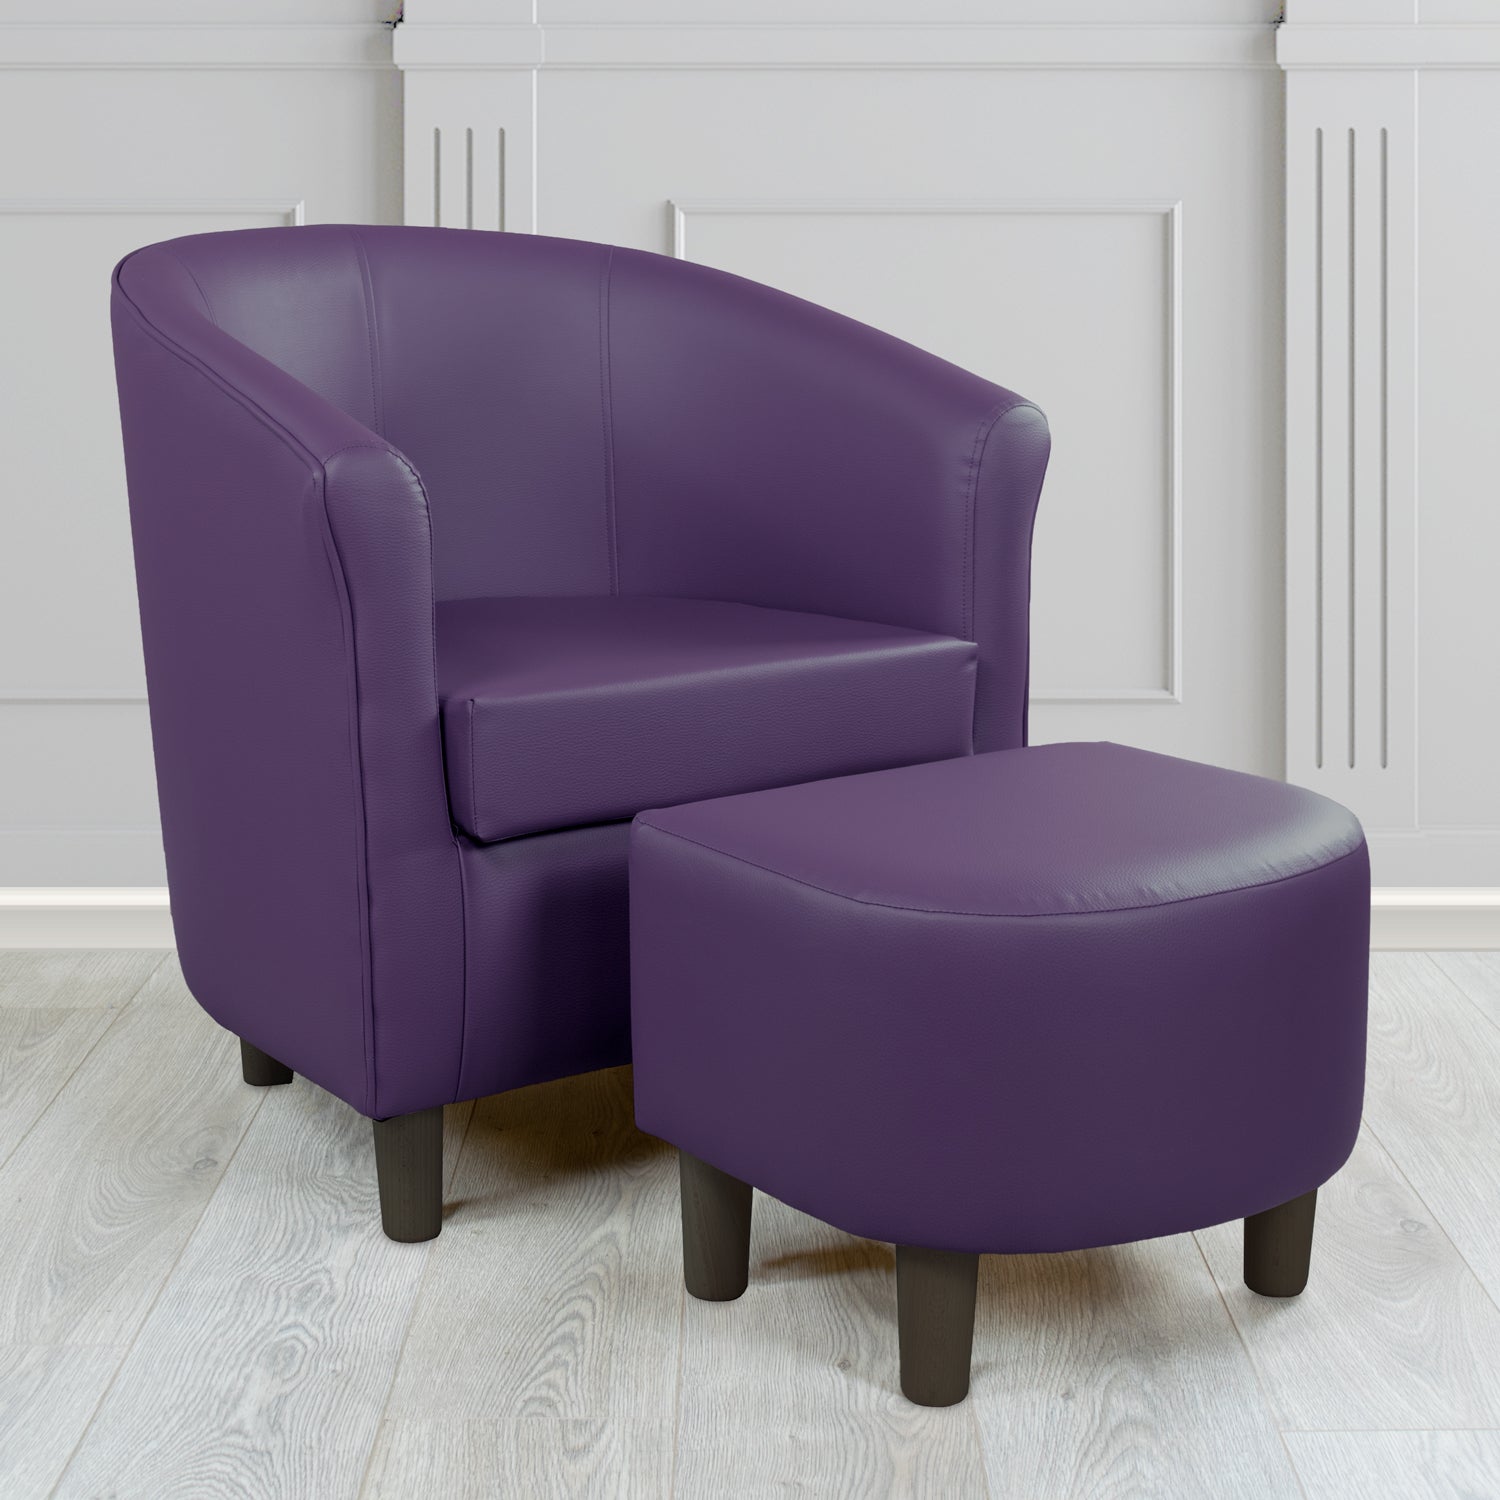 Tuscany Just Colour Blackberry Faux Leather Tub Chair with Dee Footstool Set - The Tub Chair Shop